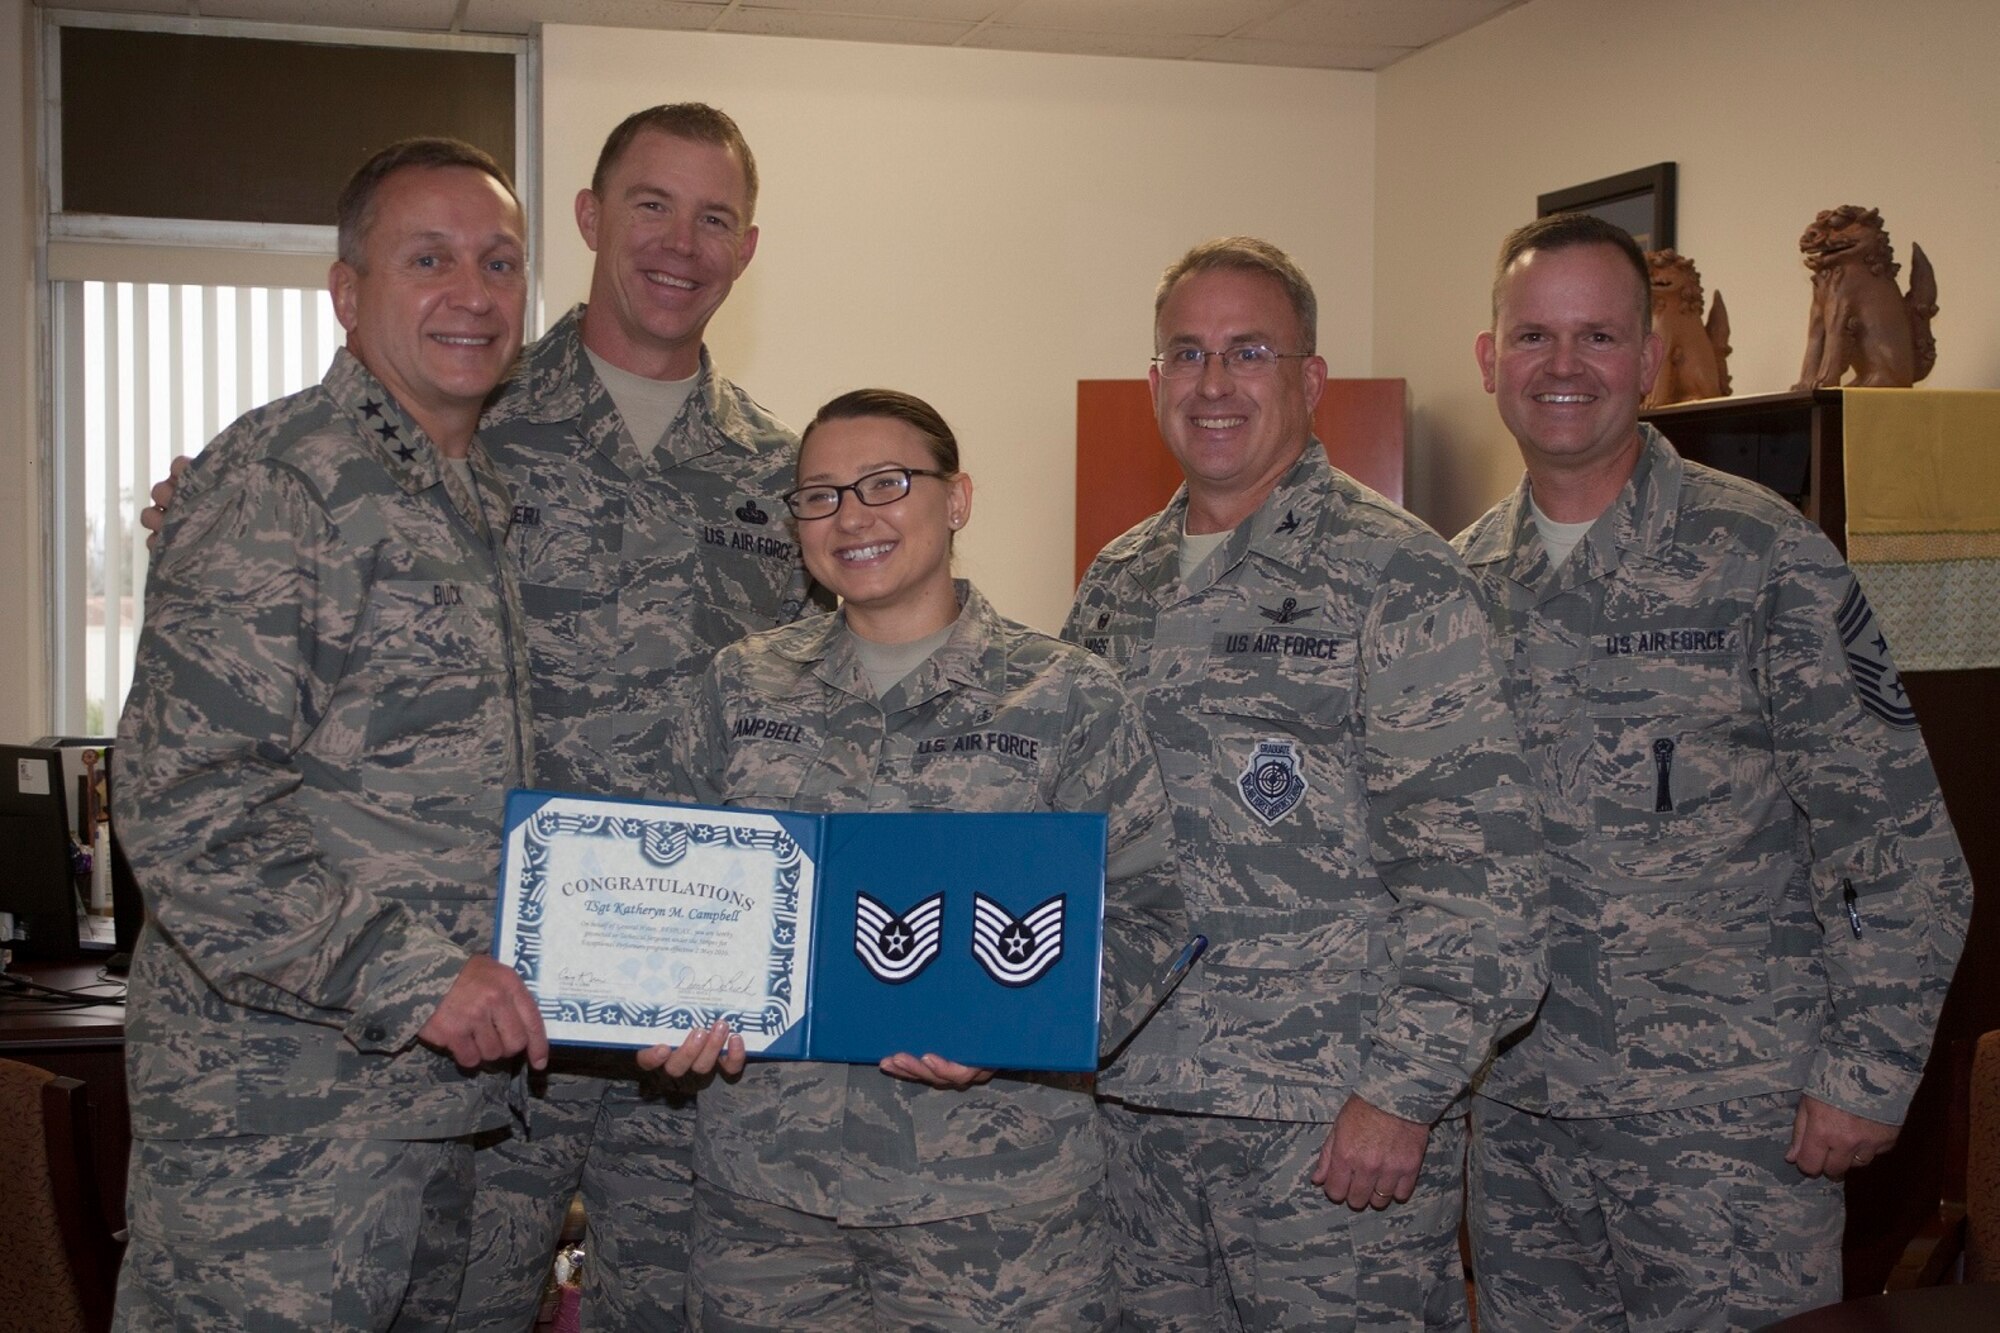 Staff Sgt. Katheryn Campbell, 30th Medical Support Squadron medical readiness flight chief, poses with Lt. Gen. David J. Buck, Commander, 14th Air Force (Air Forces Strategic), Air Force Space Command; and Commander, Joint Functional Component Command for Space, U.S. Strategic Command, Chief MSgt. Craig Neri, Command Chief Master Sergeant, 14th Air Force (Air Forces Strategic), Air Force Space Command; and Command Senior Enlisted Leader, Joint Functional Component Command for Space, U.S. Strategic Command, Col. J. Christopher Moss, Commander 30th Space Wing, and Chief MSgt. Robert Bedell, 30th Space Wing command chief, after recently being selected for STEP promotion to technical sergeant, Vandenberg Air Force Base, Calif. Campbell is soon leaving Vandenberg to take the next step in her career - becoming a bioenvironmental technical school instructor at Wright-Patterson Air Force Base. 